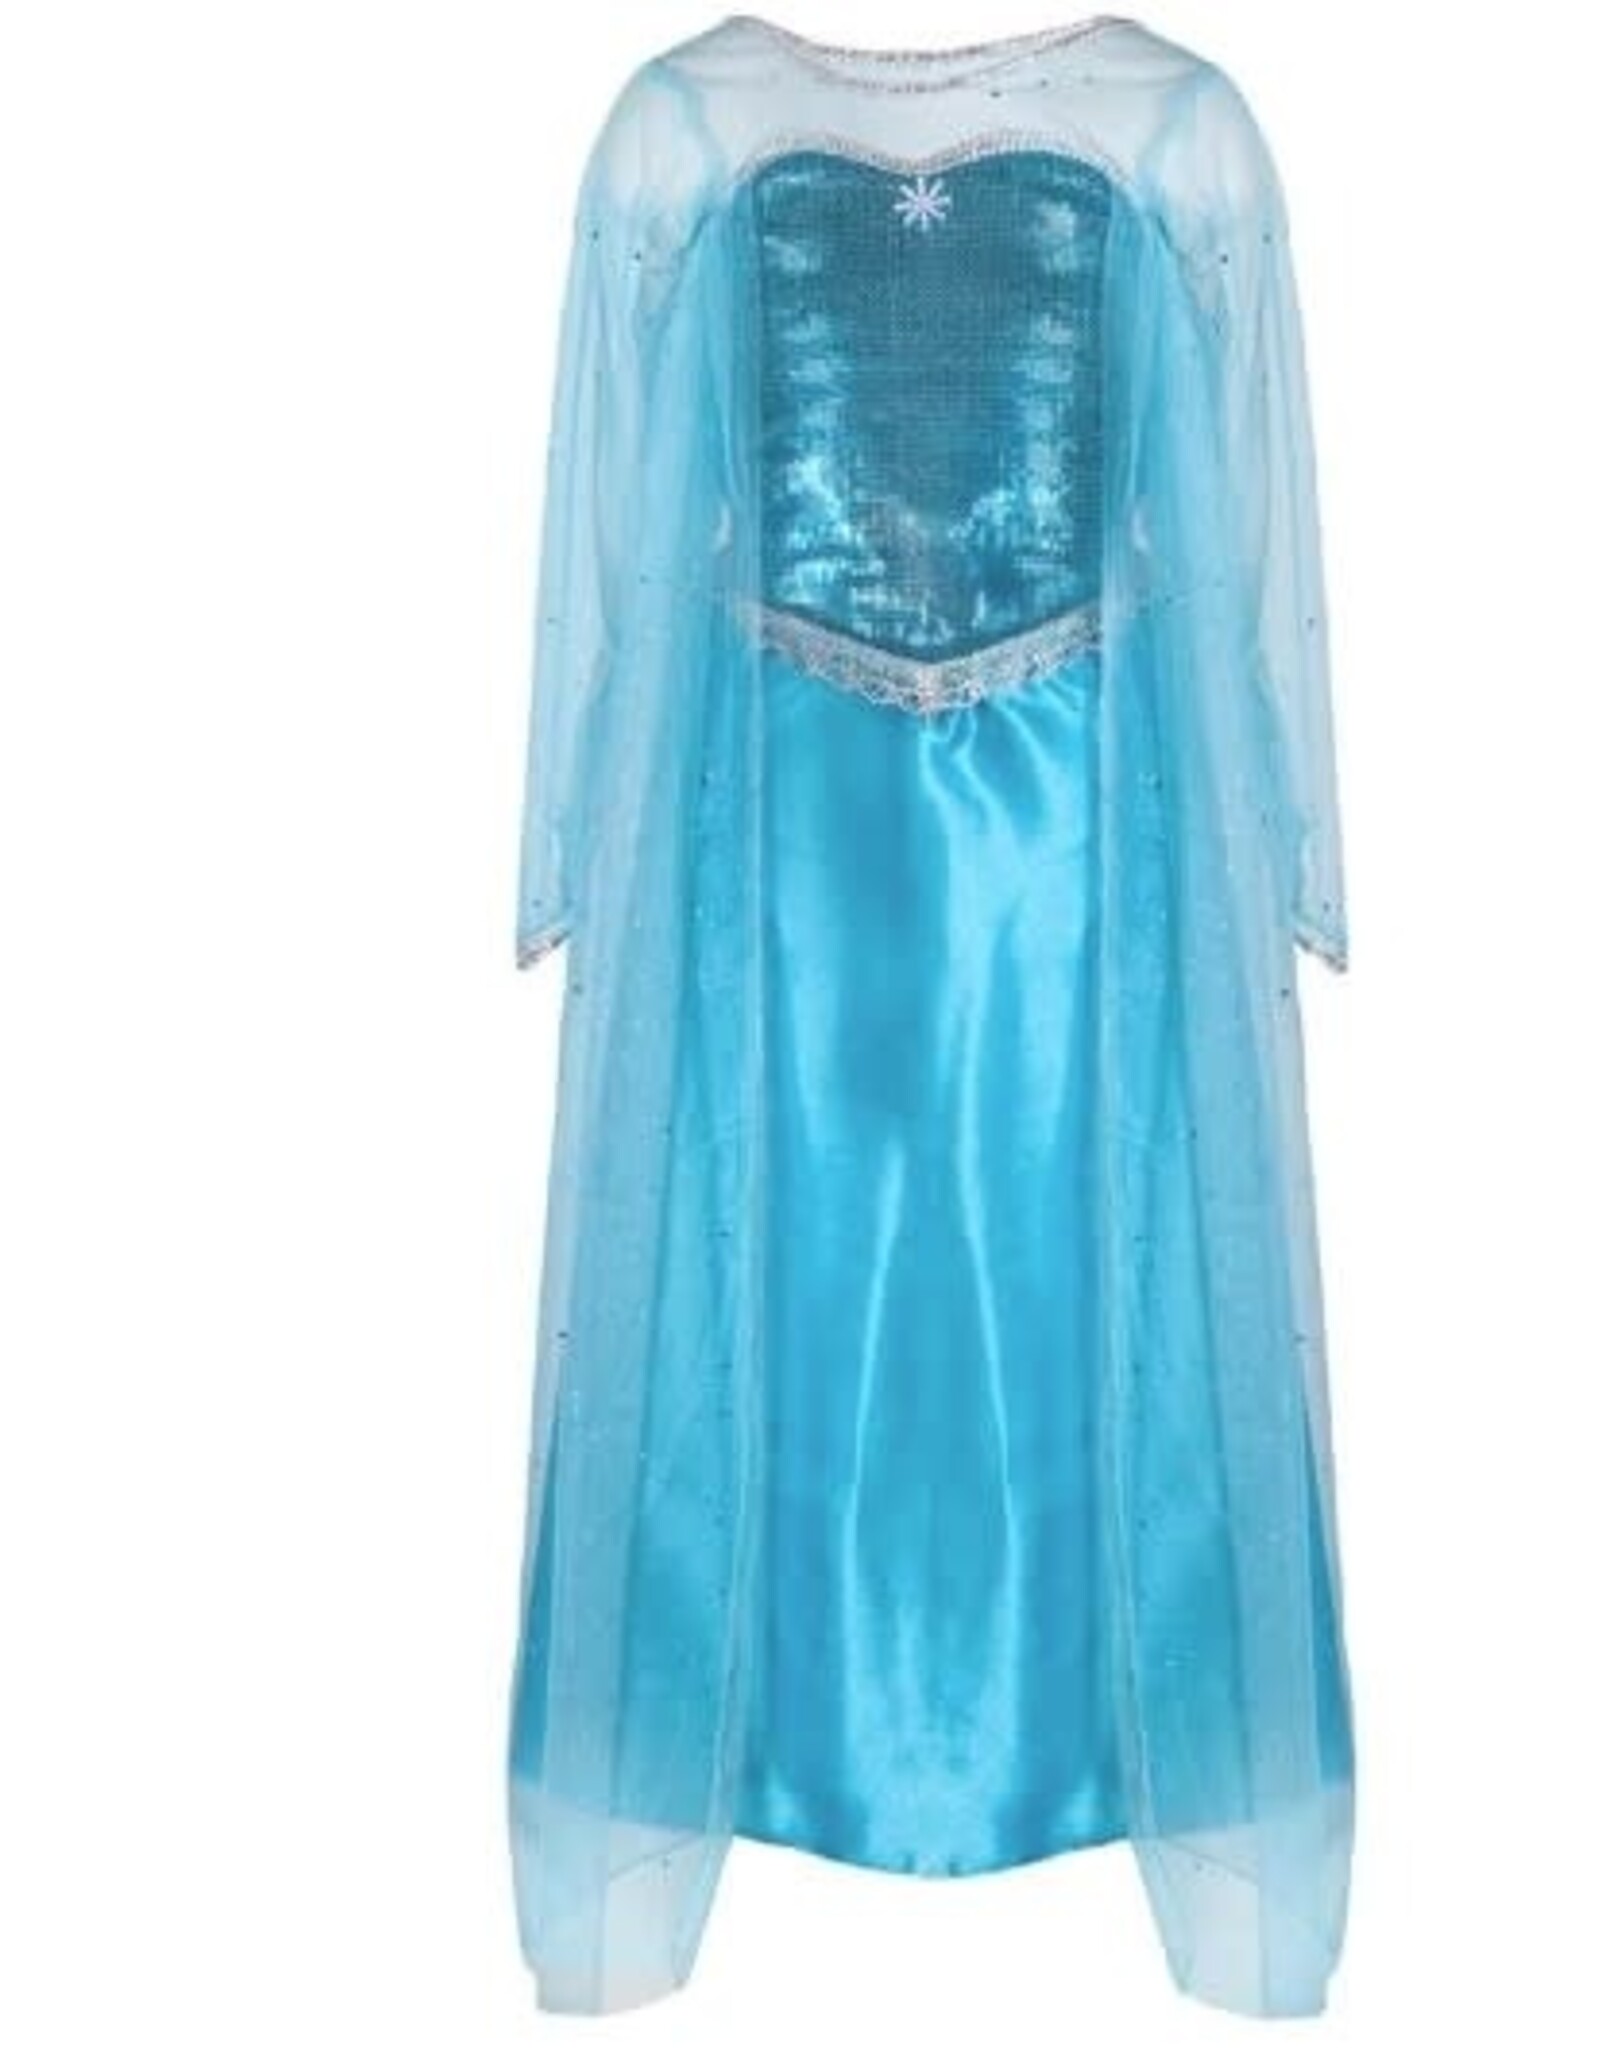 Great Pretenders Ice Queen Dress With Cape, Size 5-6